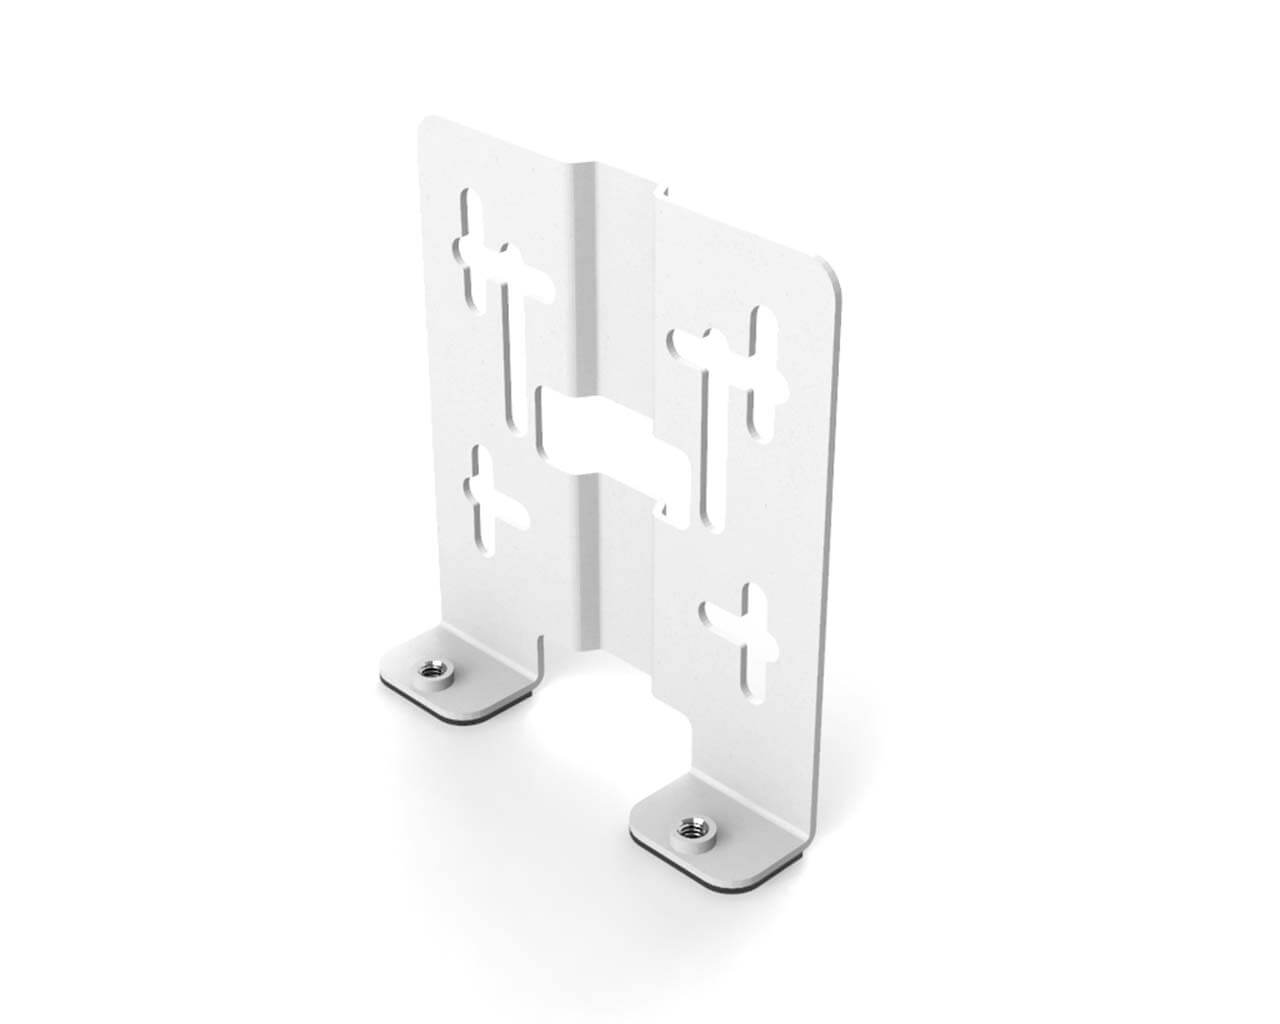 PrimoChill SX Universal Res/Pump Mount Bracket - PrimoChill - KEEPING IT COOL Sky White